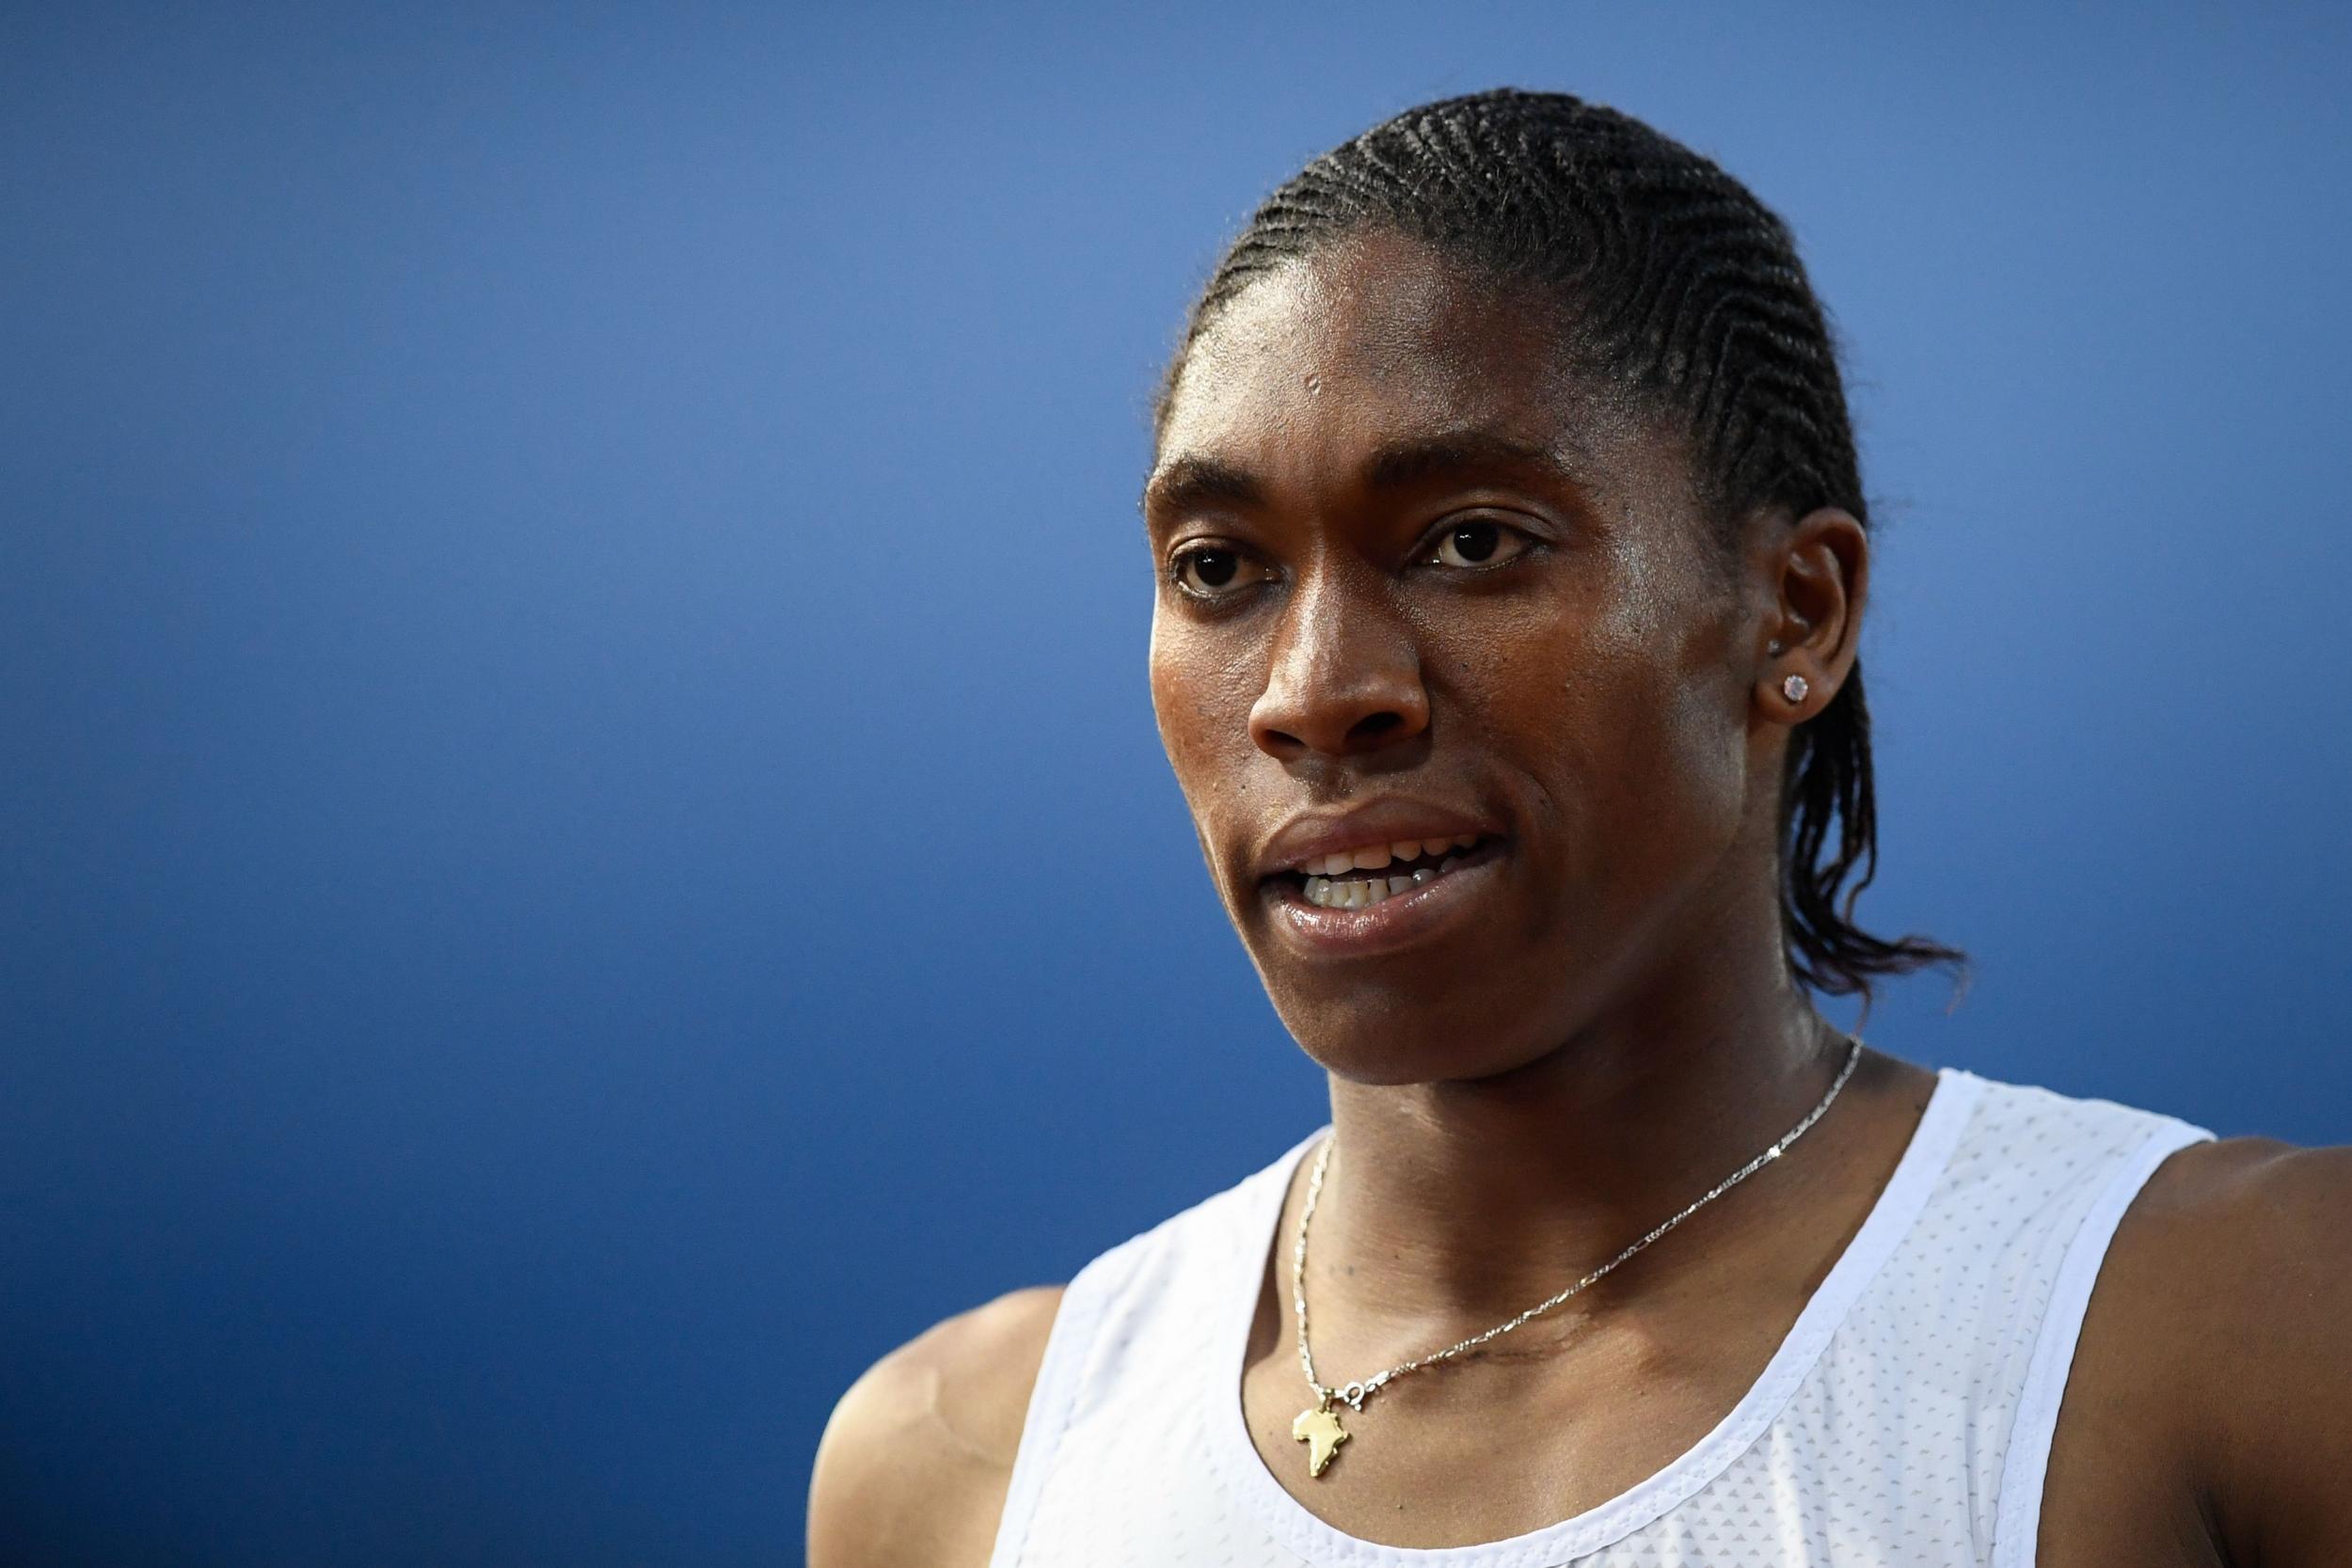 Semenya responded to the announcement by tweeting: ‘Sometimes it’s better to react with no reaction’